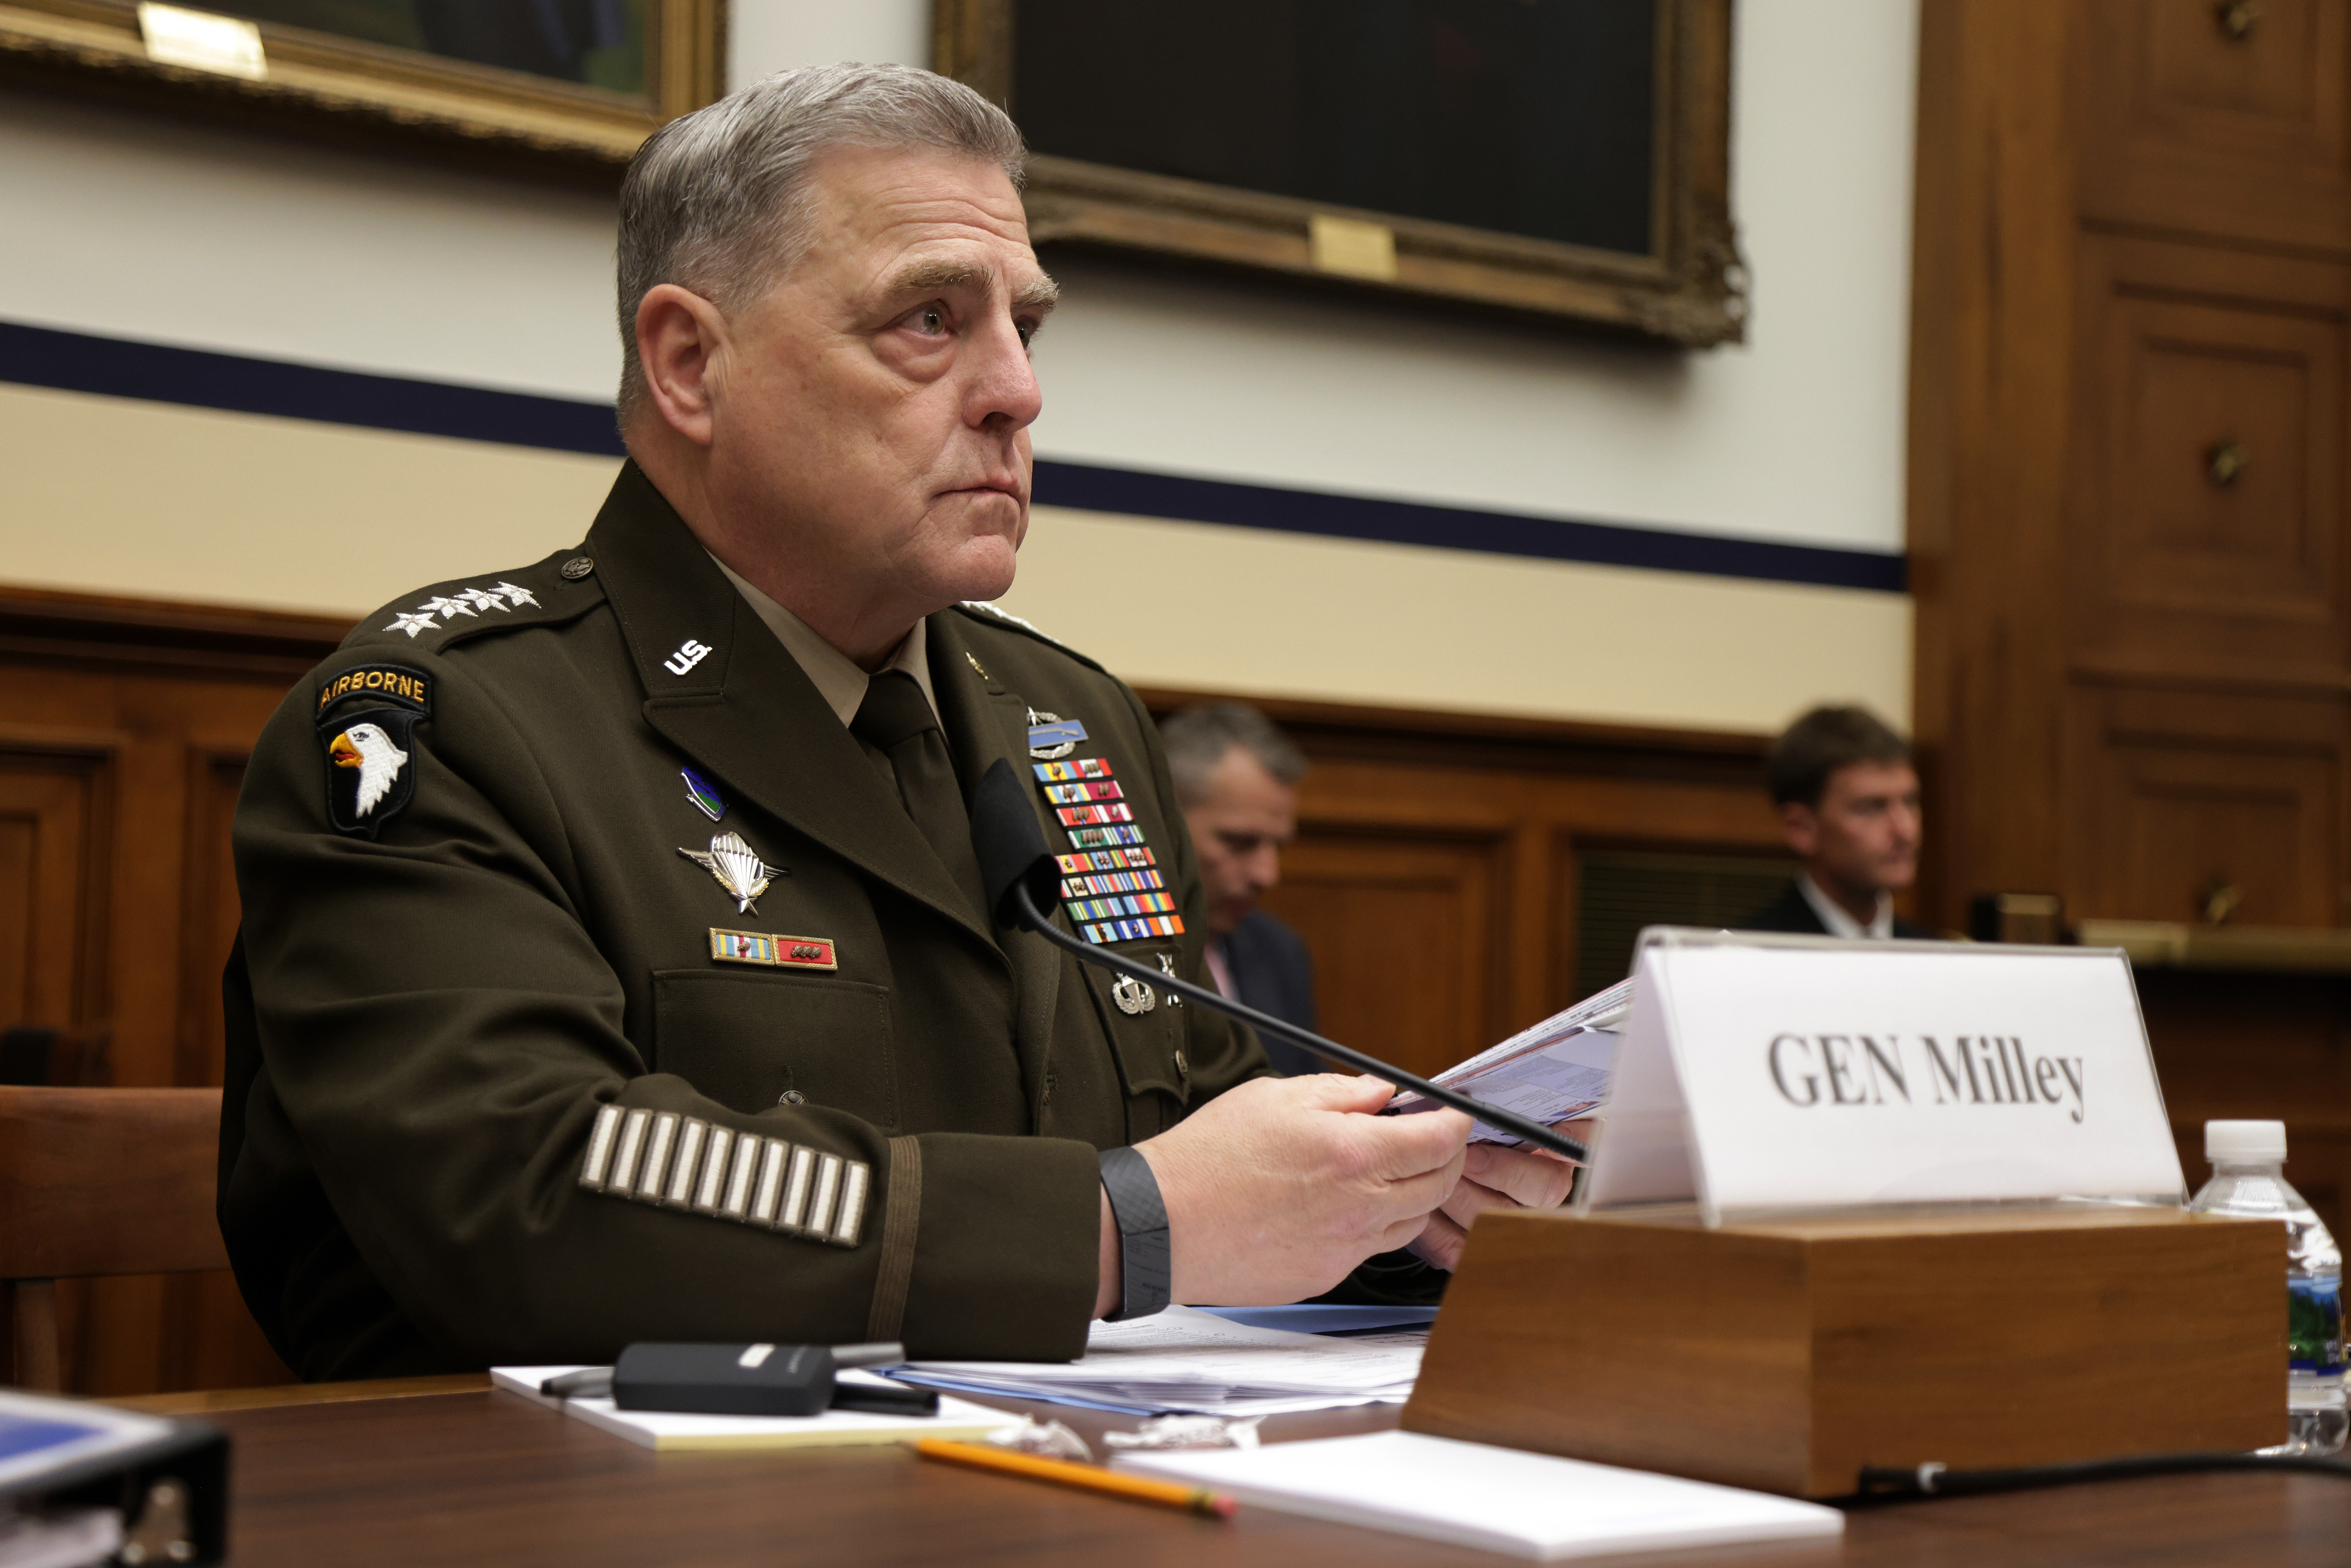 WASHINGTON, DC - JUNE 23: U.S. Chairman of the Joint Chiefs of Staff General Mark Milley testifies during a hearing before the House Committee on Armed Services at Rayburn House Office Building June 23, 2021 on Capitol Hill in Washington, DC. The committee held the hearing on “The Fiscal Year 2022 National Defense Authorization Budget Request from the Department of Defense.” (Photo by Alex Wong/Getty Images)